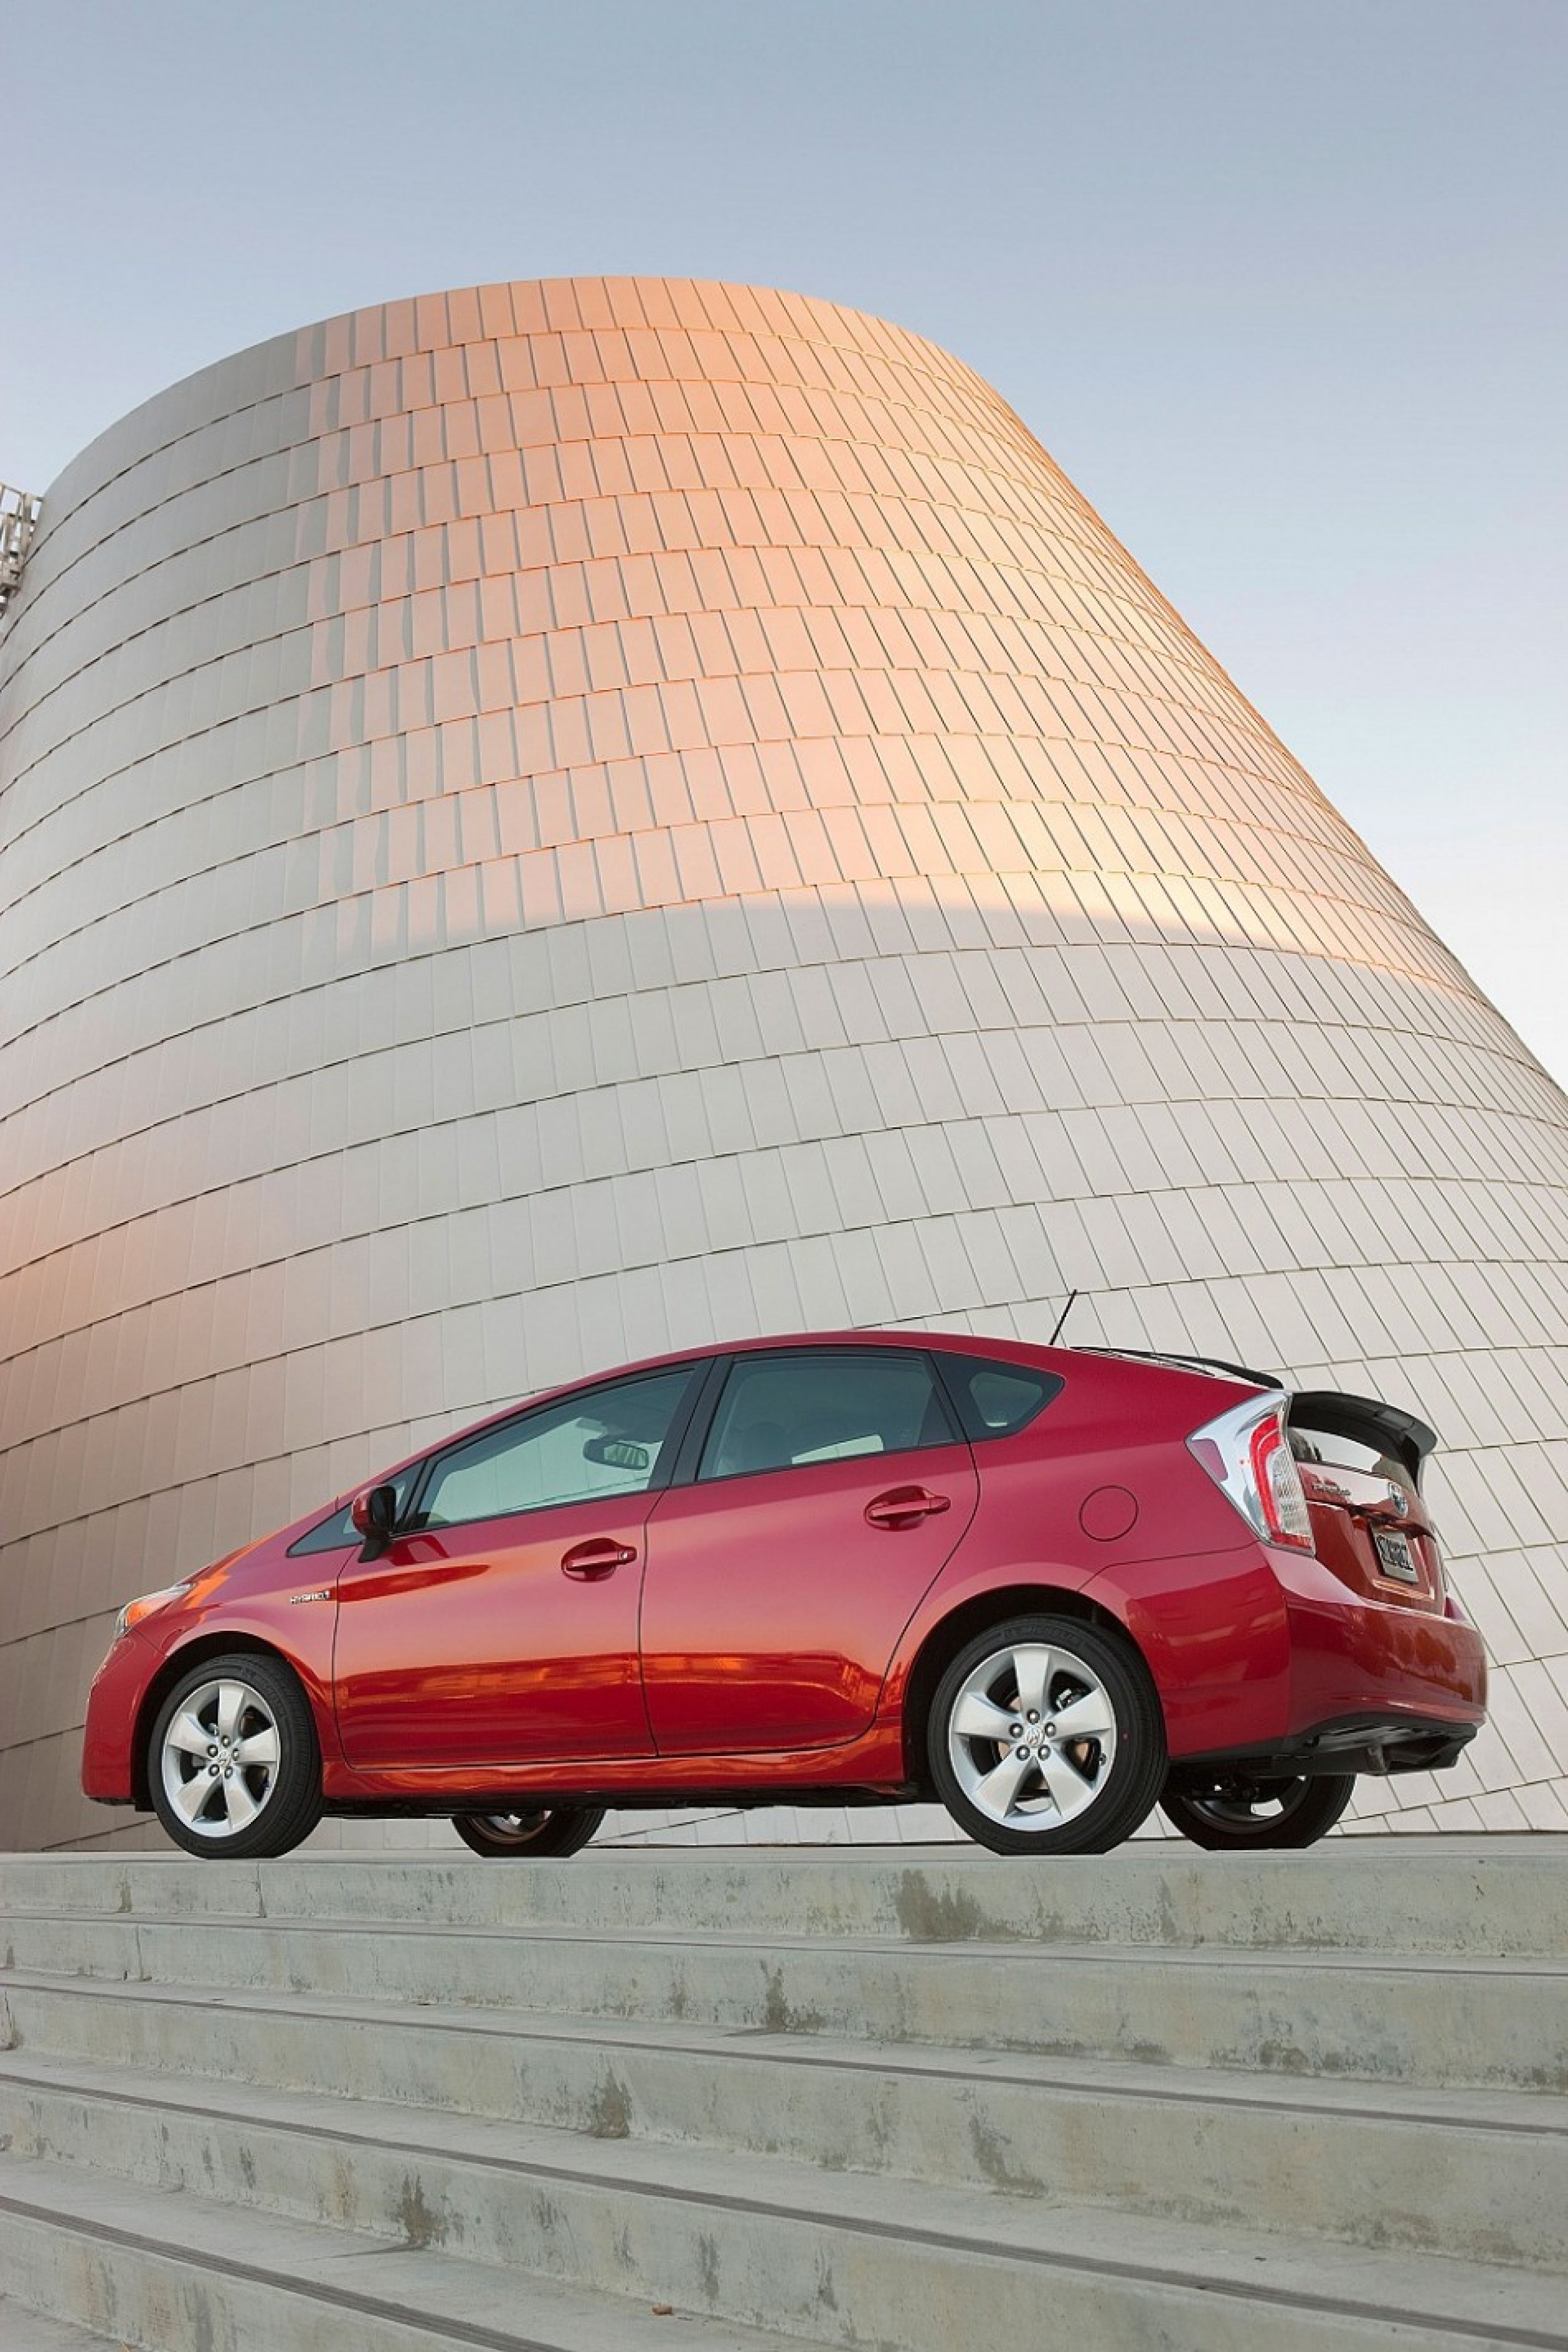 The 5 car in Americas wealthiest zip codes is the Toyota Prius with an MSRP of 30,565.